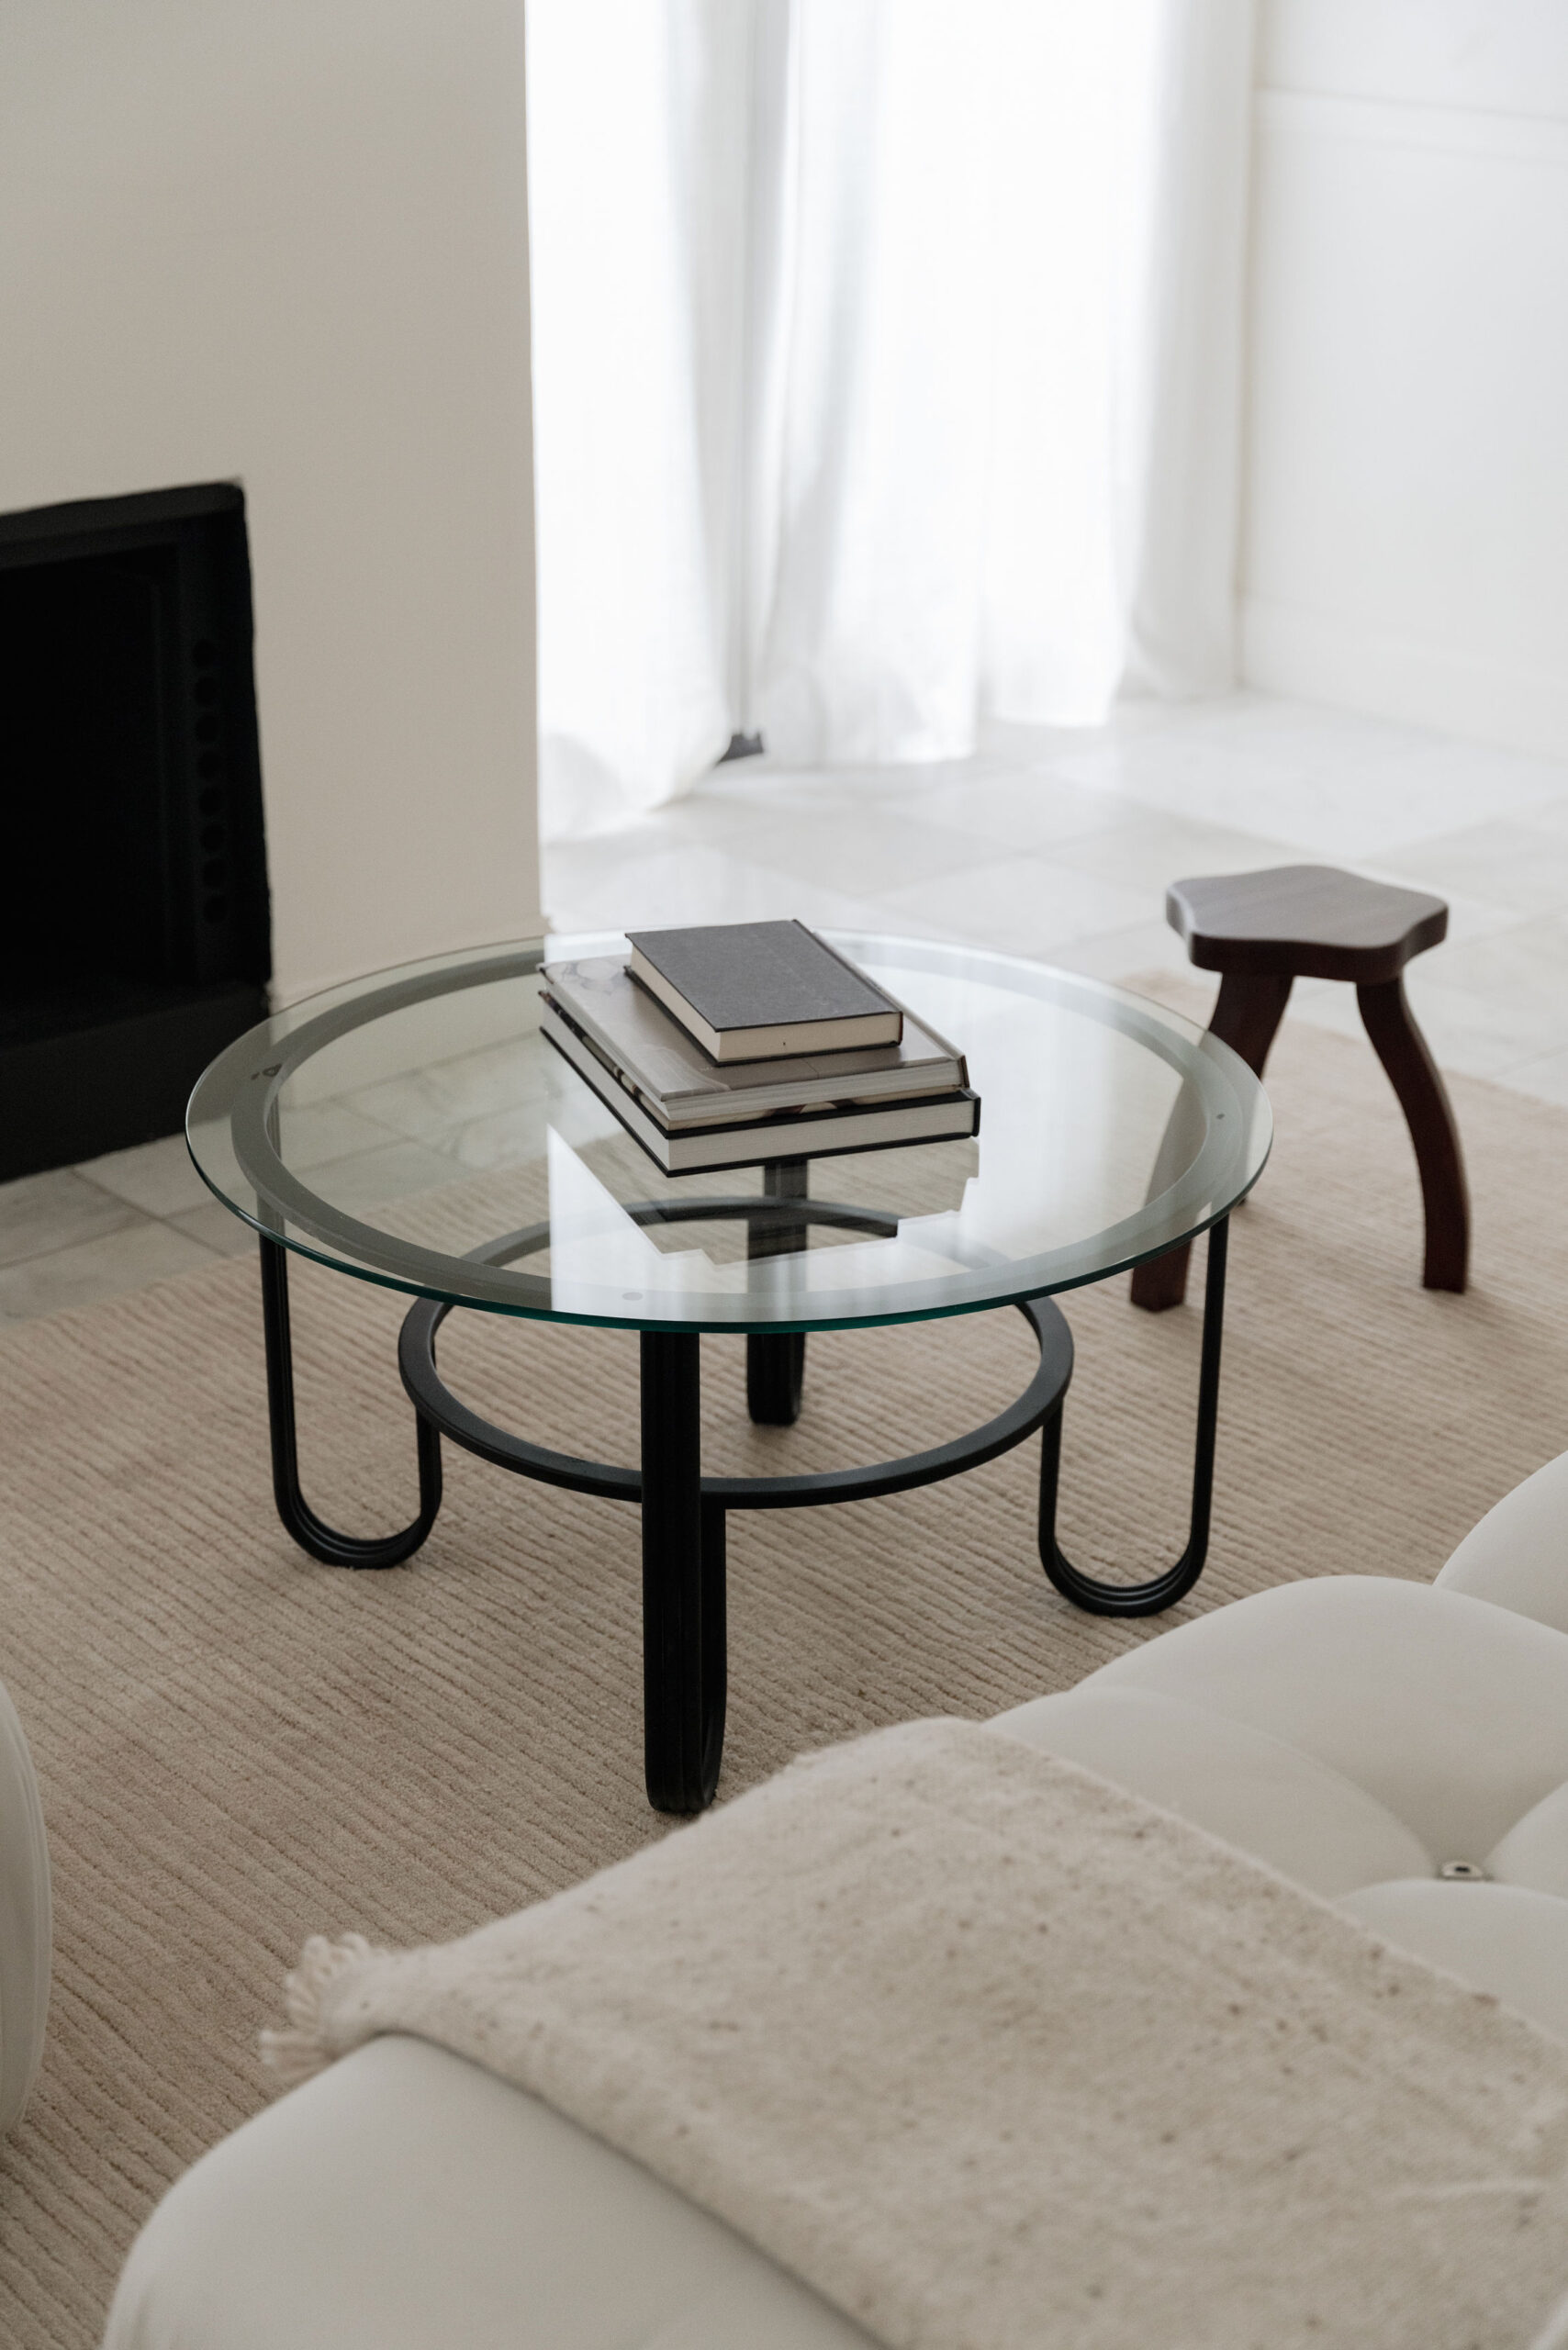 stack of books on a round glass coffee table with black metal legs